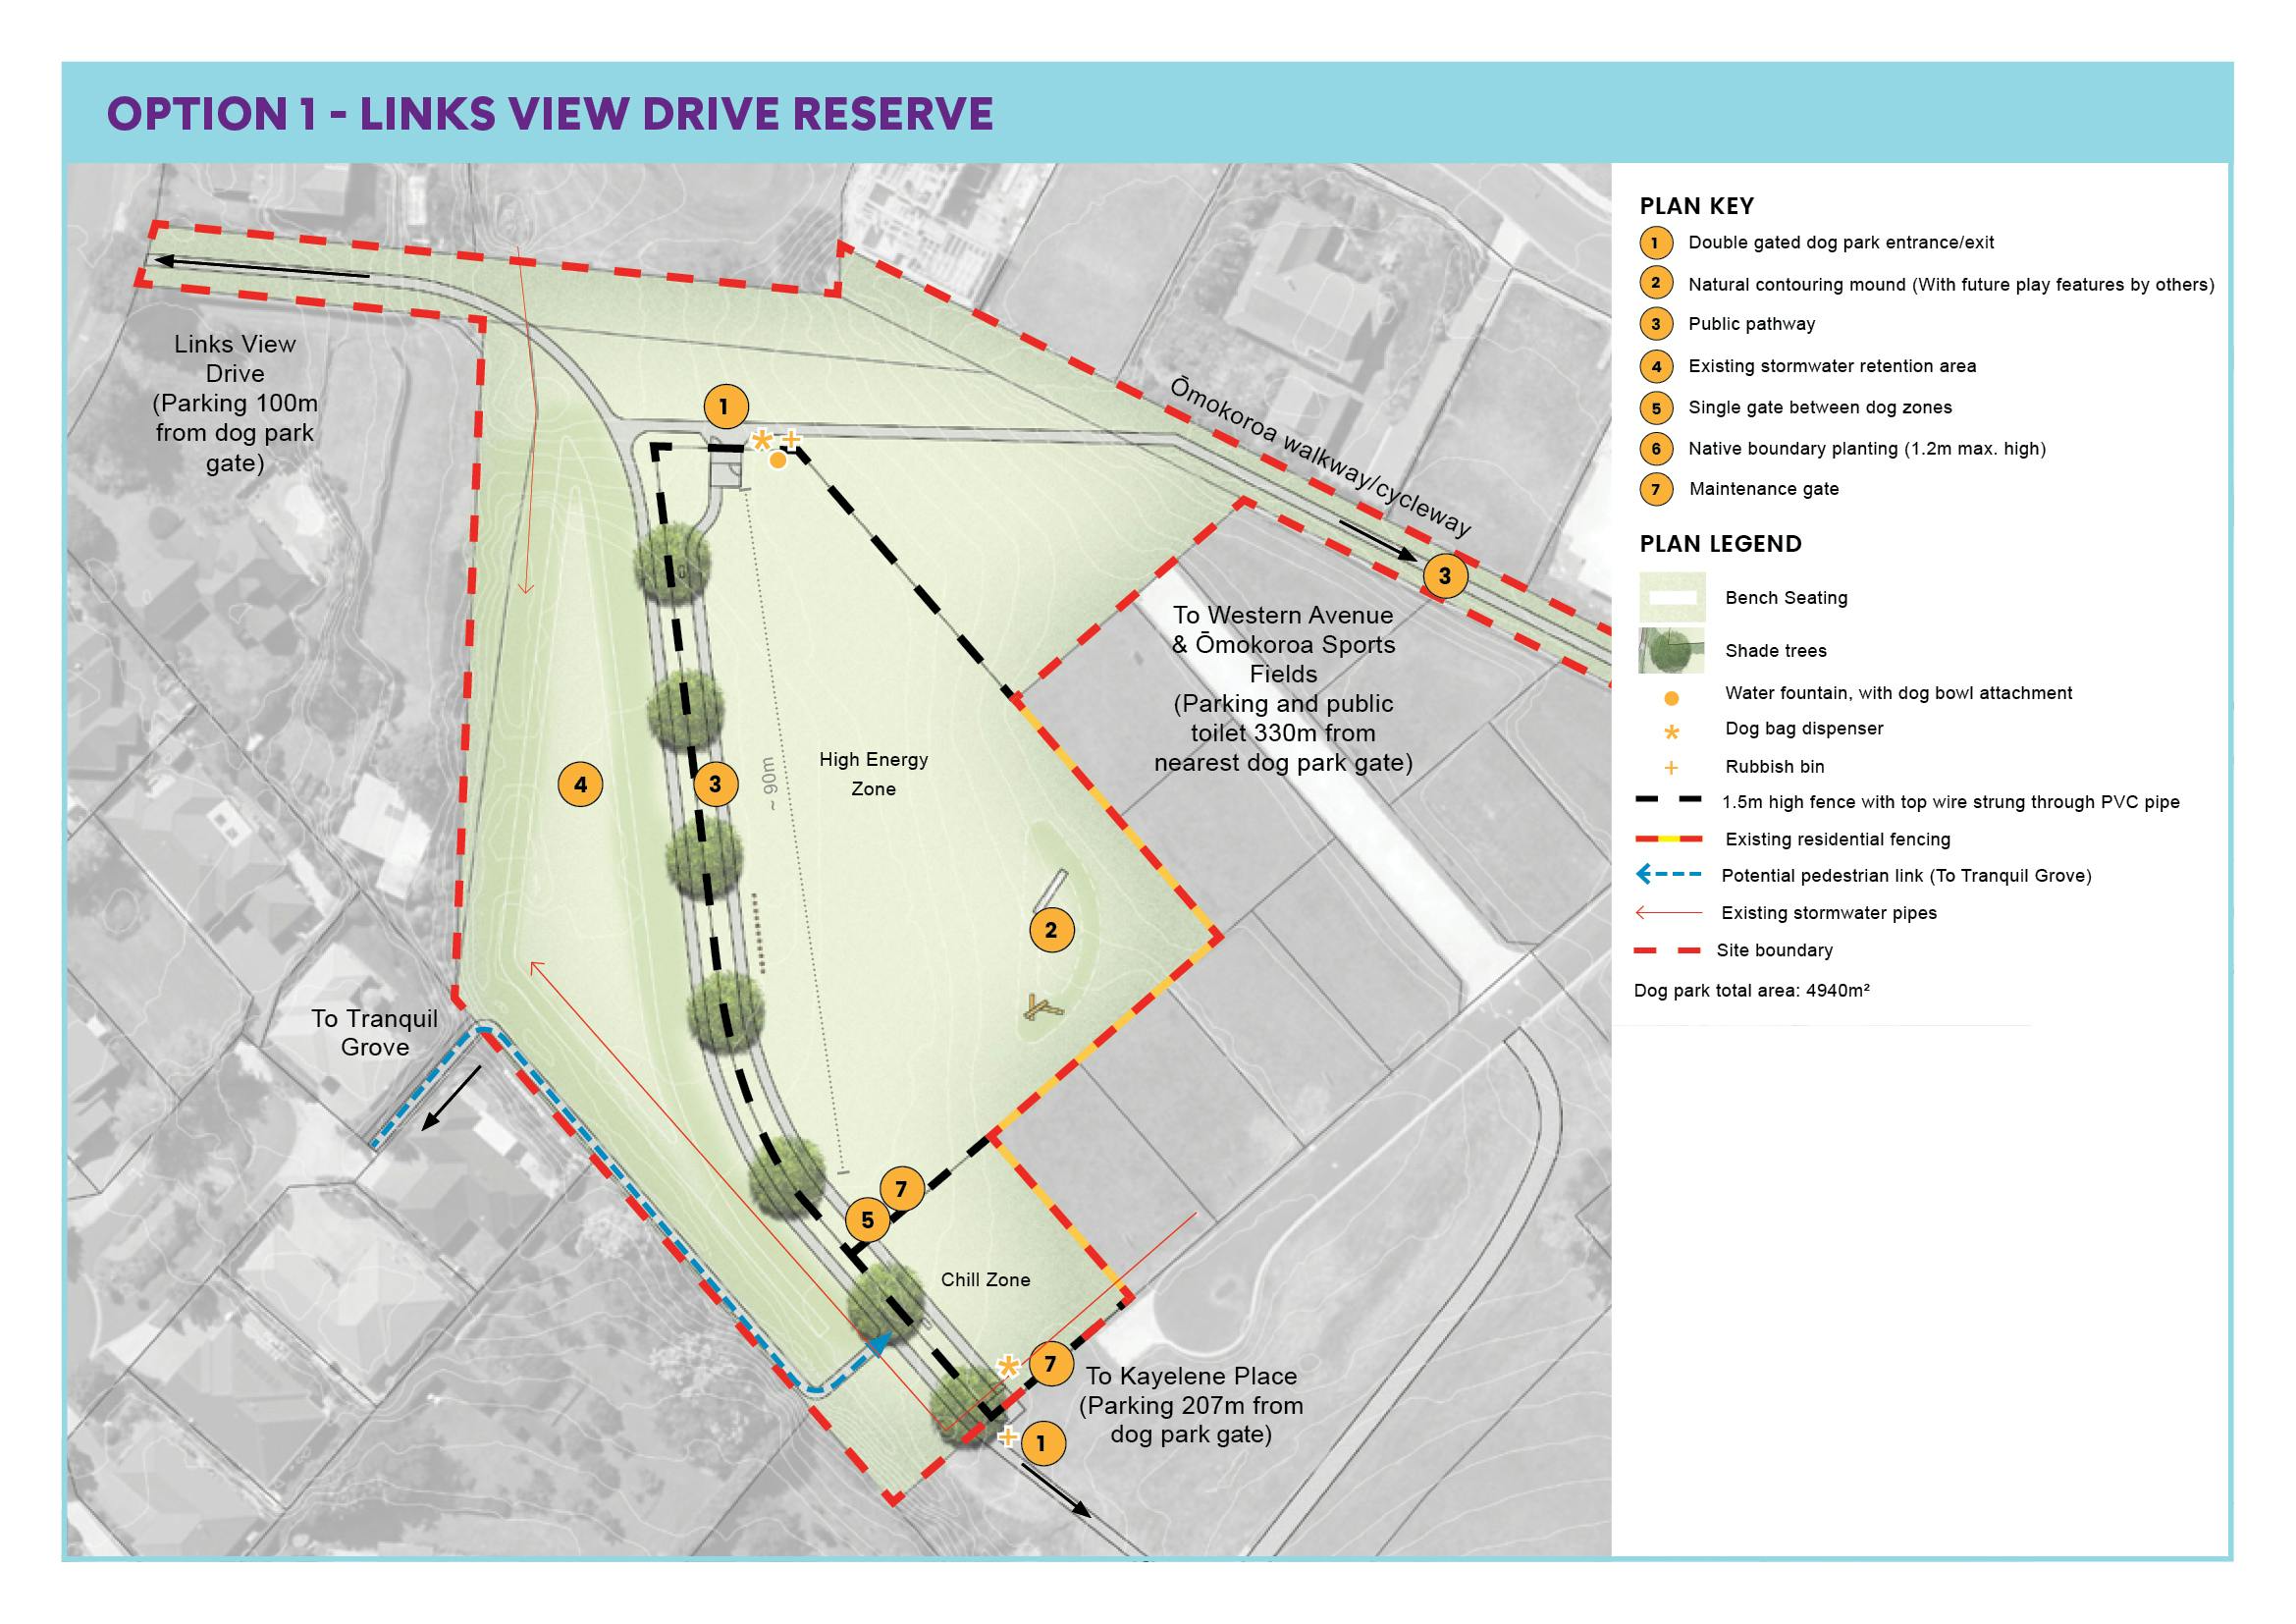 Option 1 - Links View Drive Reserve